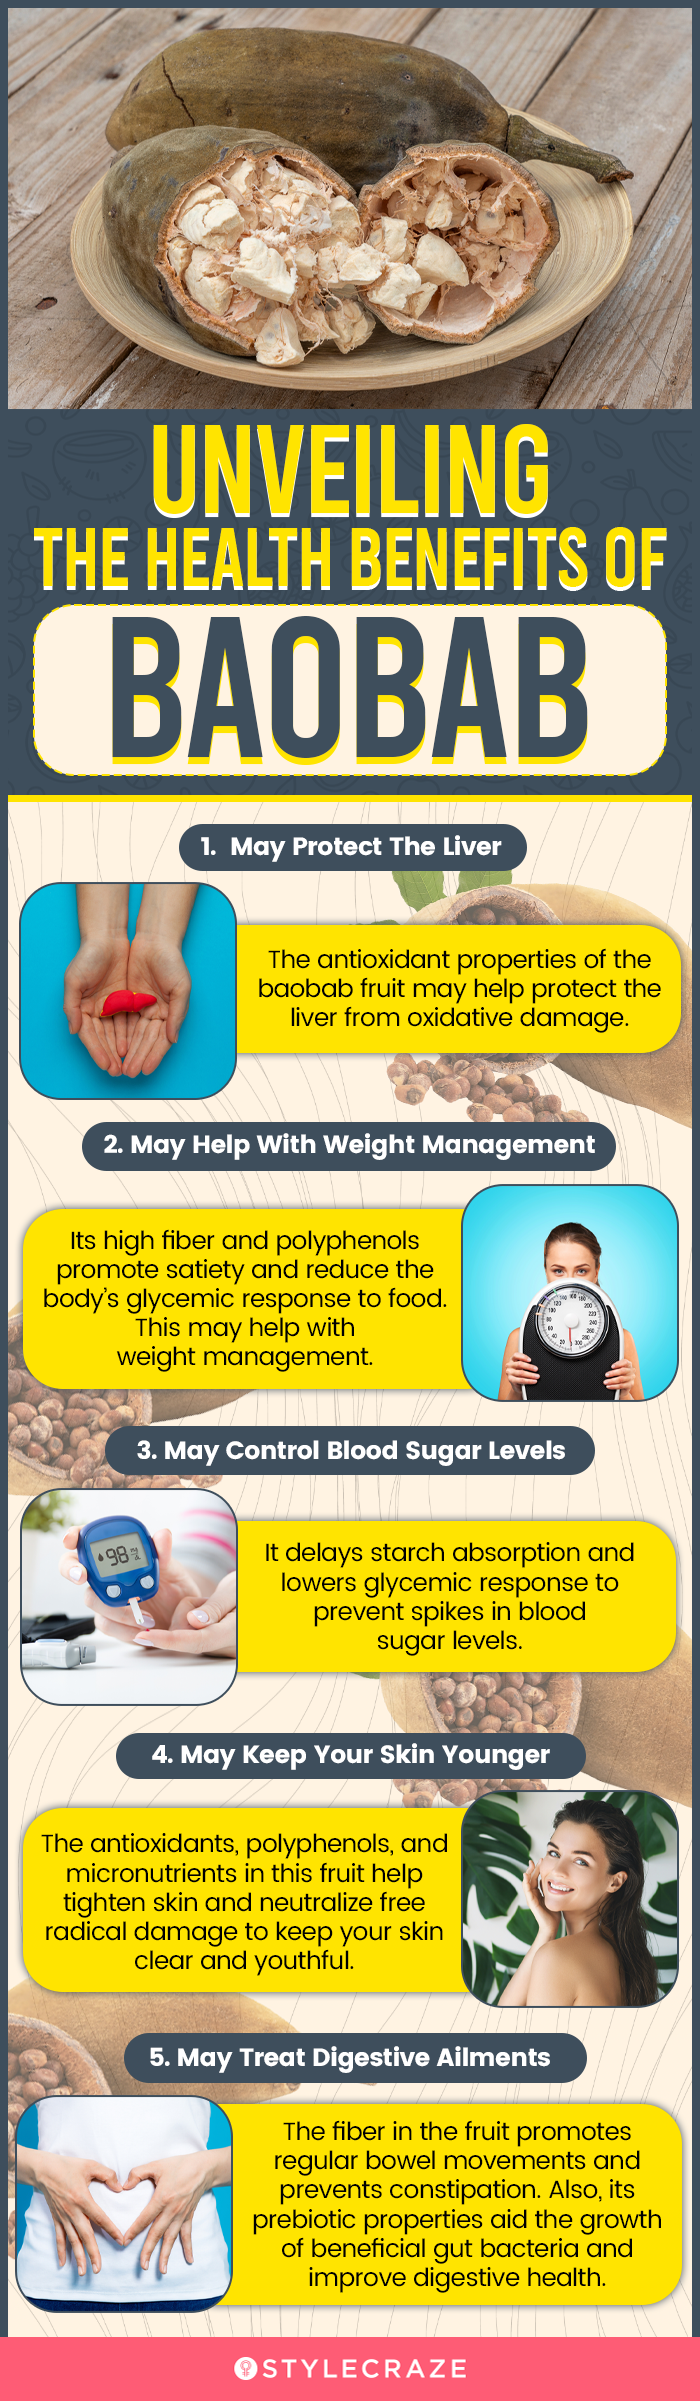 unveiling the health benefits of baobab (infographic)